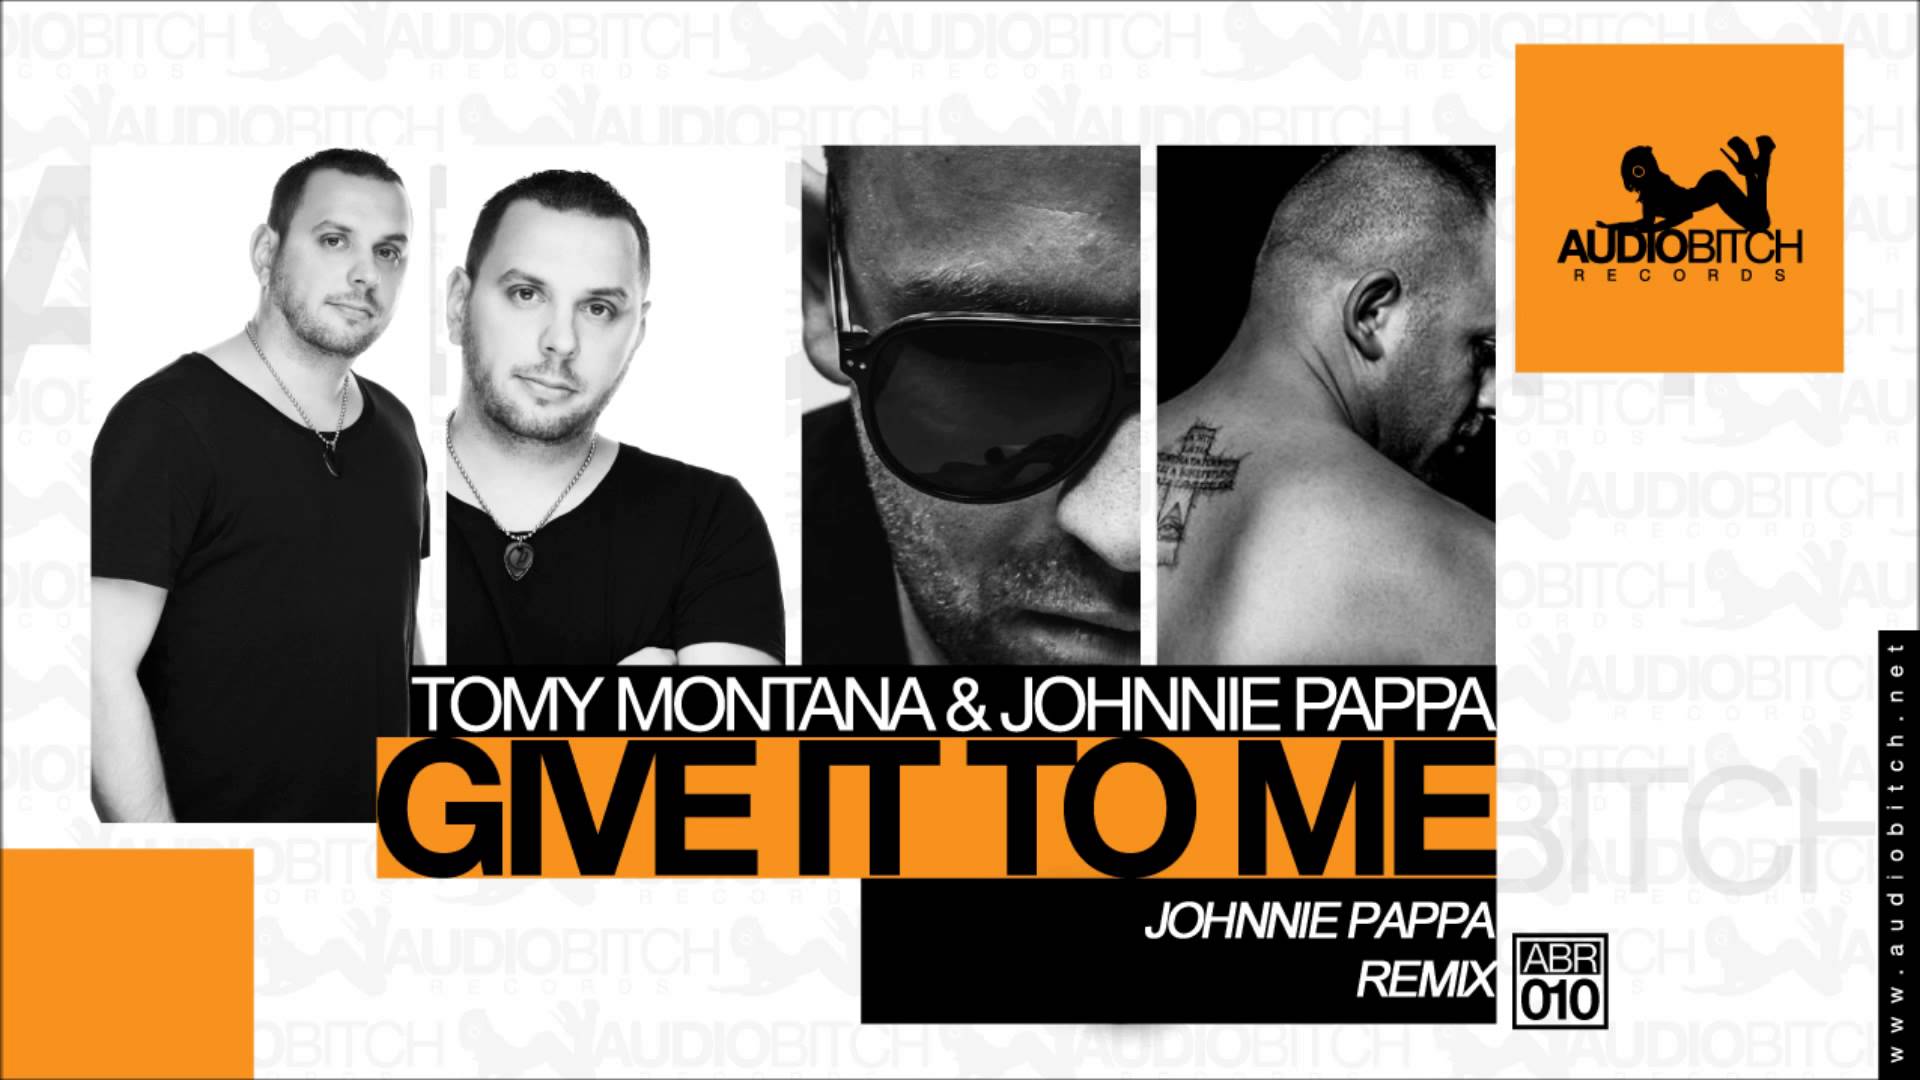 maxresdefault.jpg : ` Tomy Montana & Johnnie Pappa - Give It To Me (Johnnie Pappa Remix) `